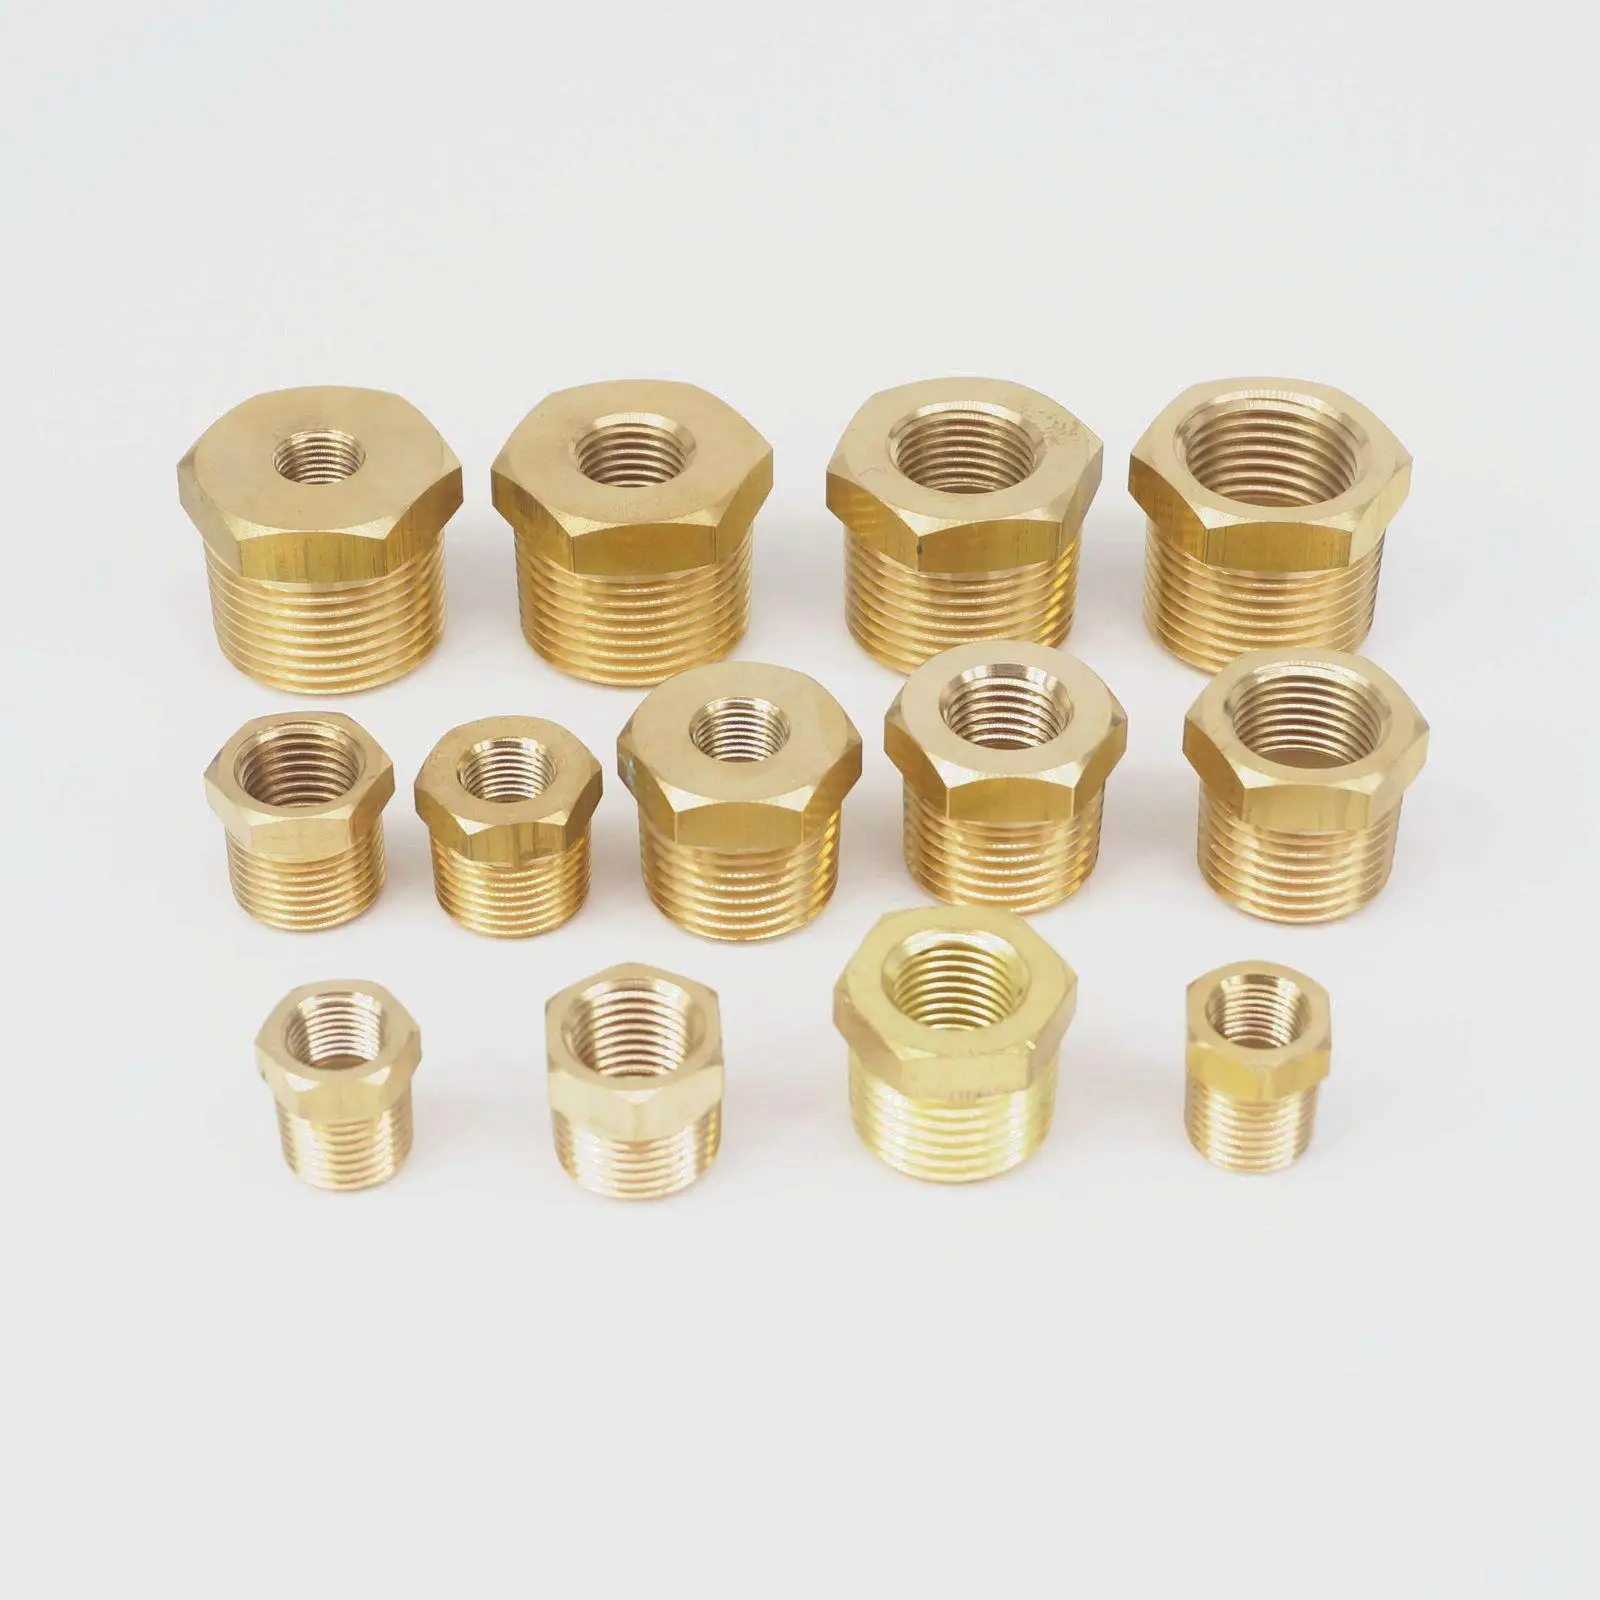 BSP Connector Brass Hose Fitting Reducer Bushing 1/8" 1/4" 3/8" 1/2" 3/4" Hex 